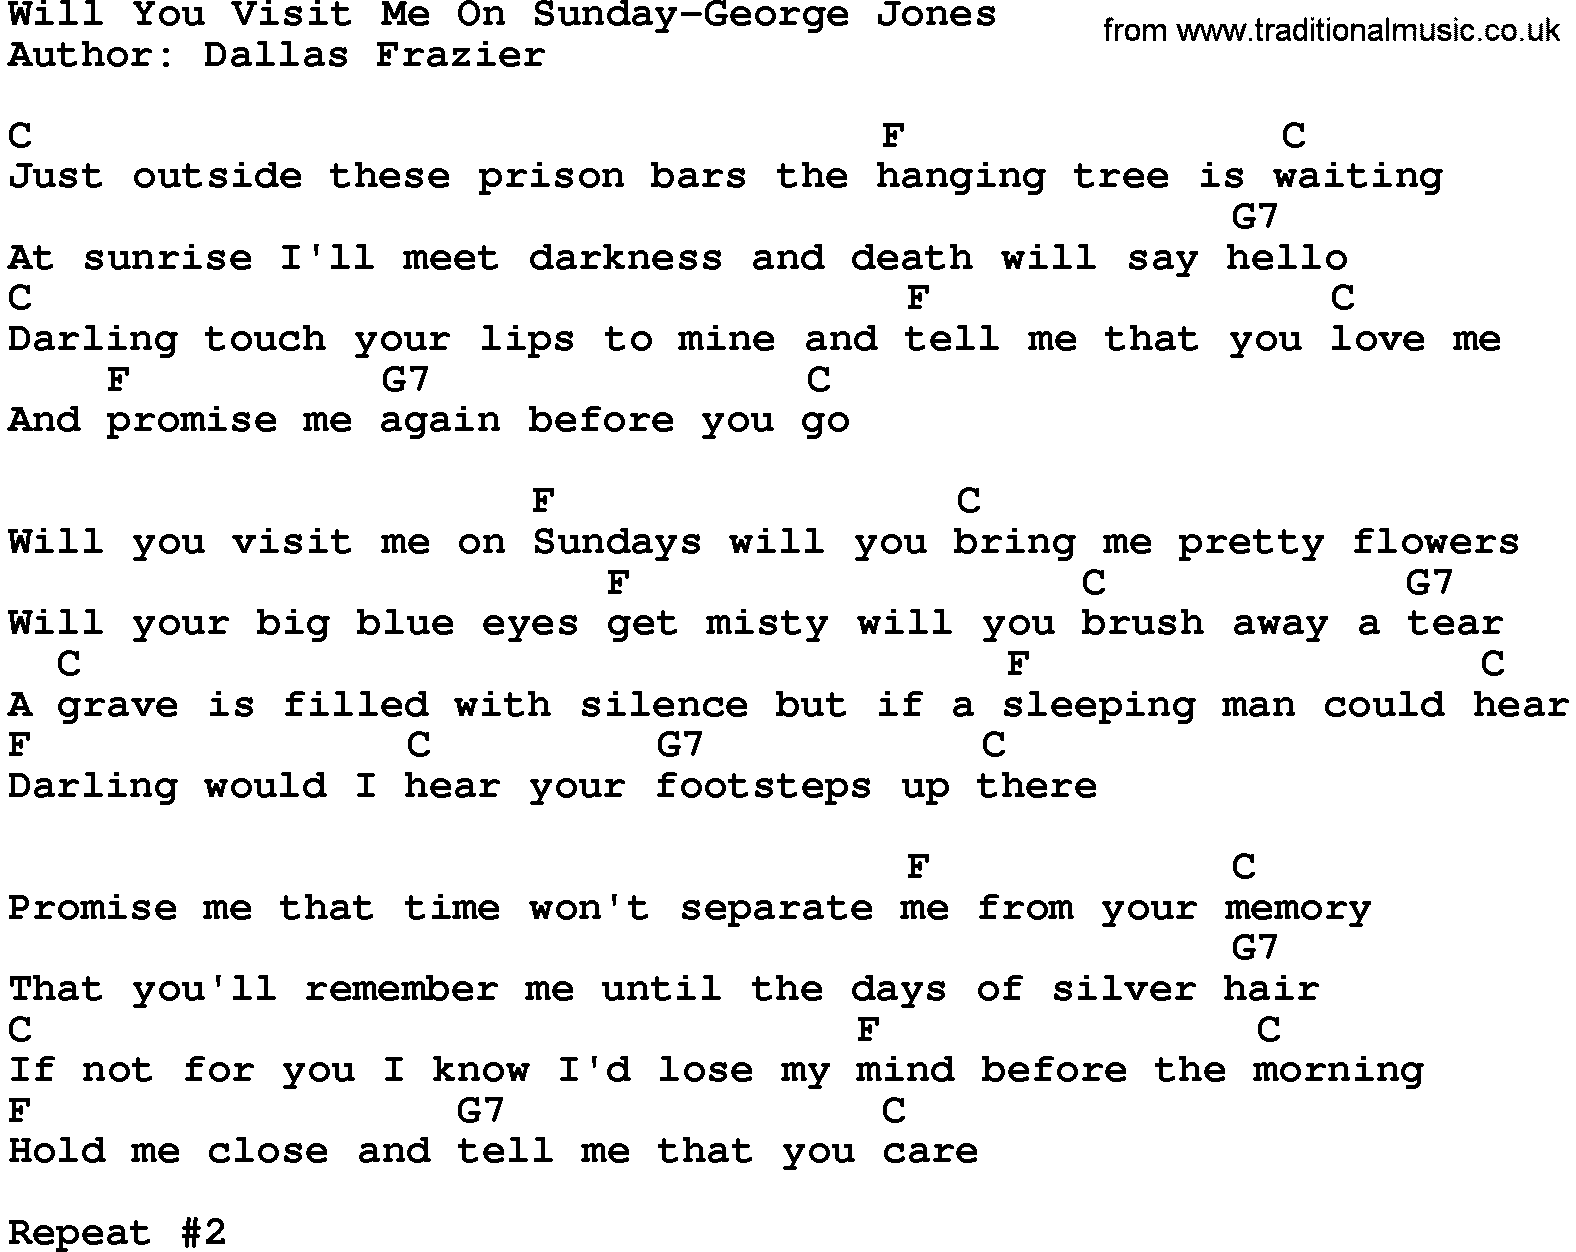 Country music song: Will You Visit Me On Sunday-George Jones lyrics and chords